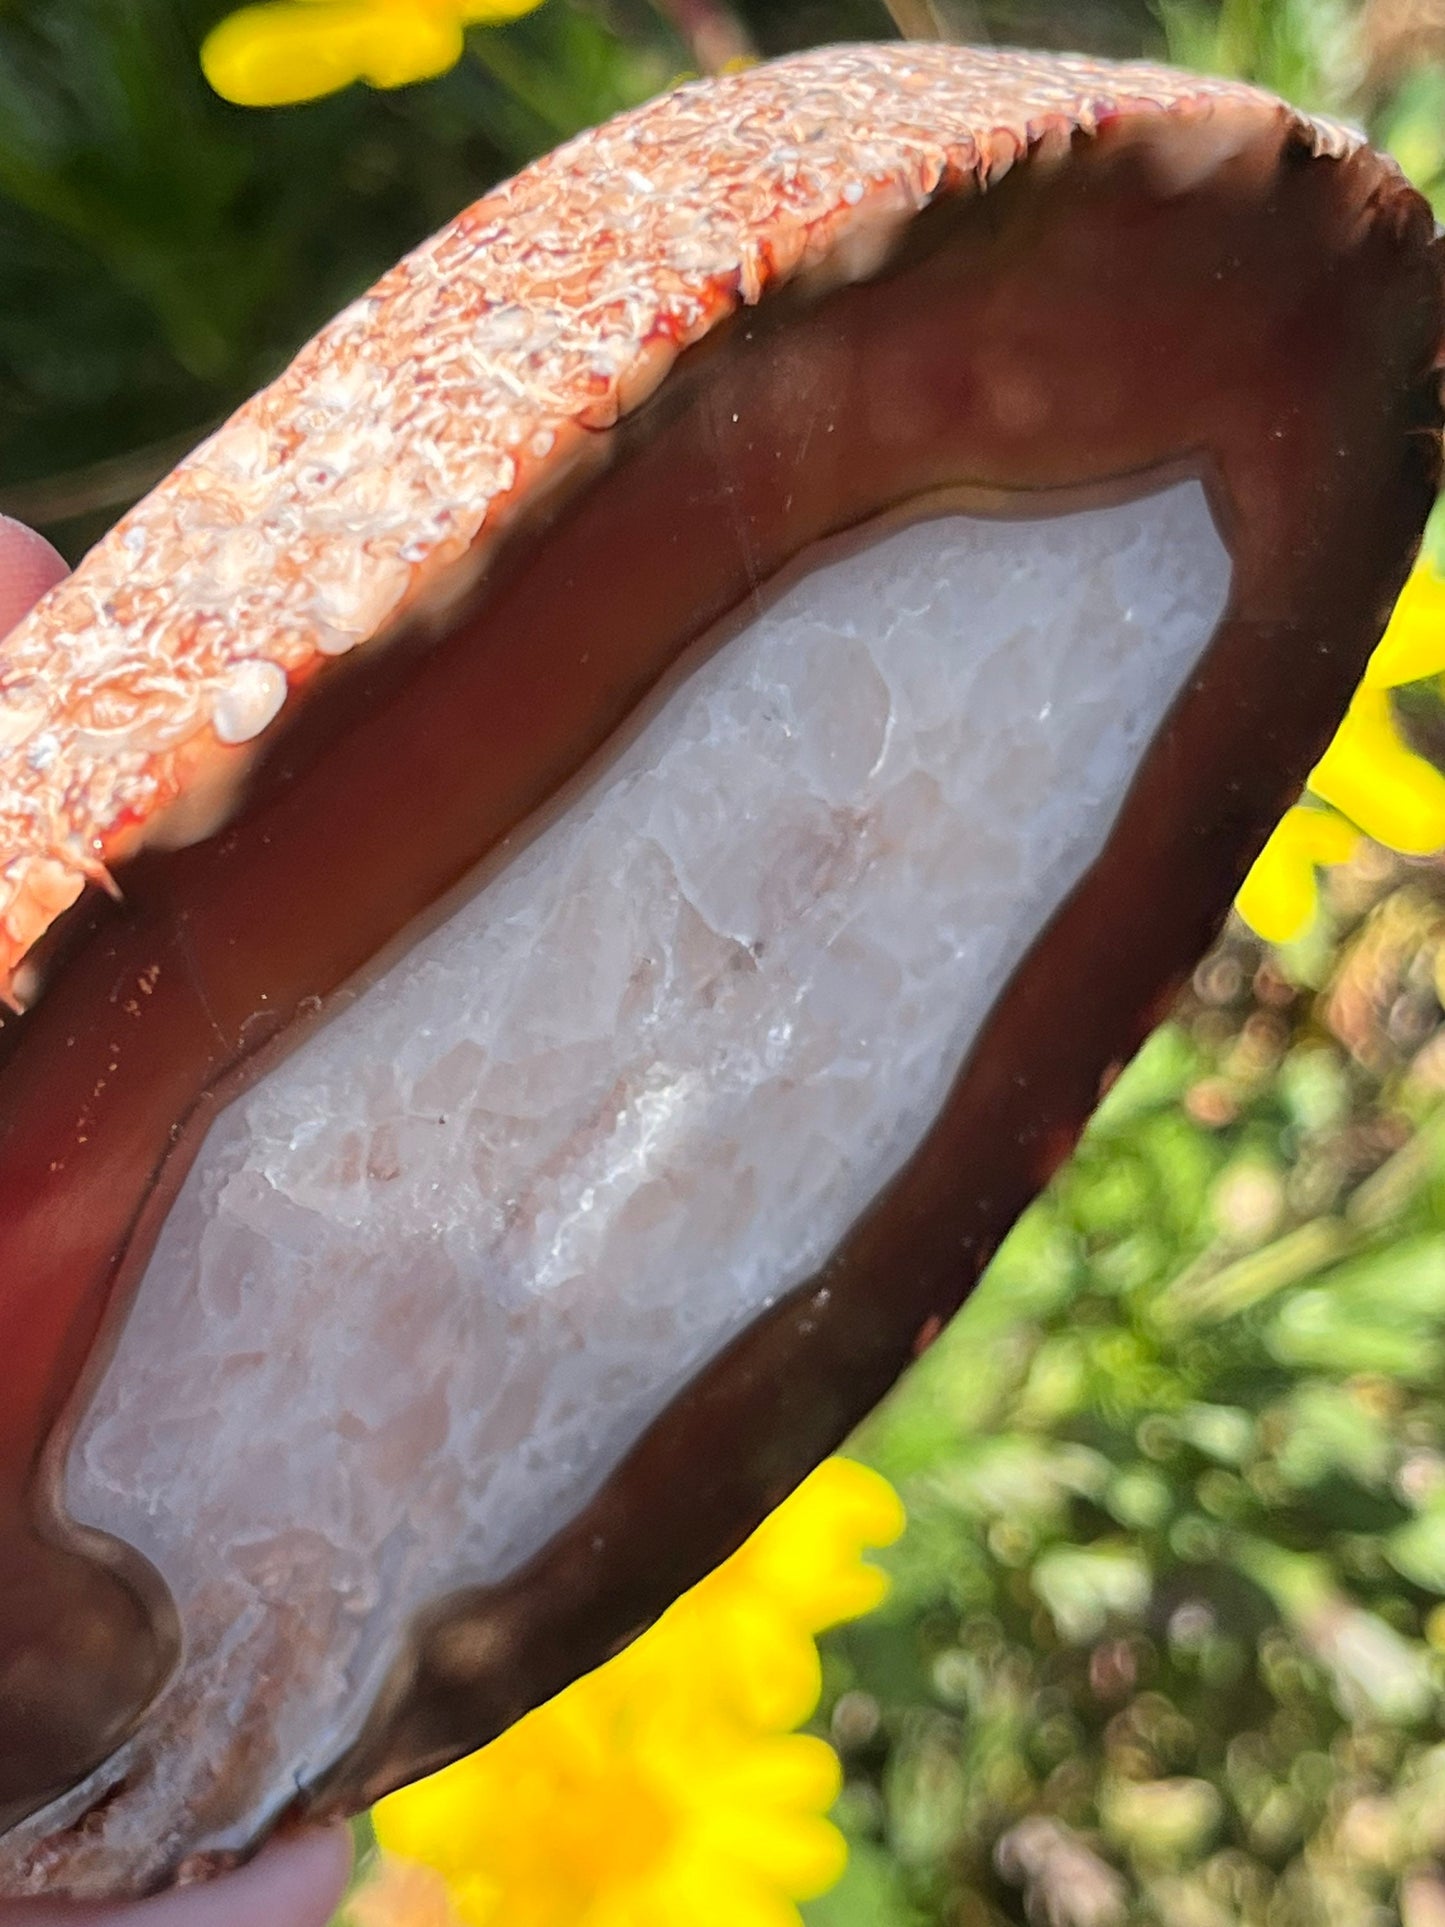 Druzy Carnelian Agate Stone Carved Crystal Slab Natural Polished Minerals Crystals ~Type 3